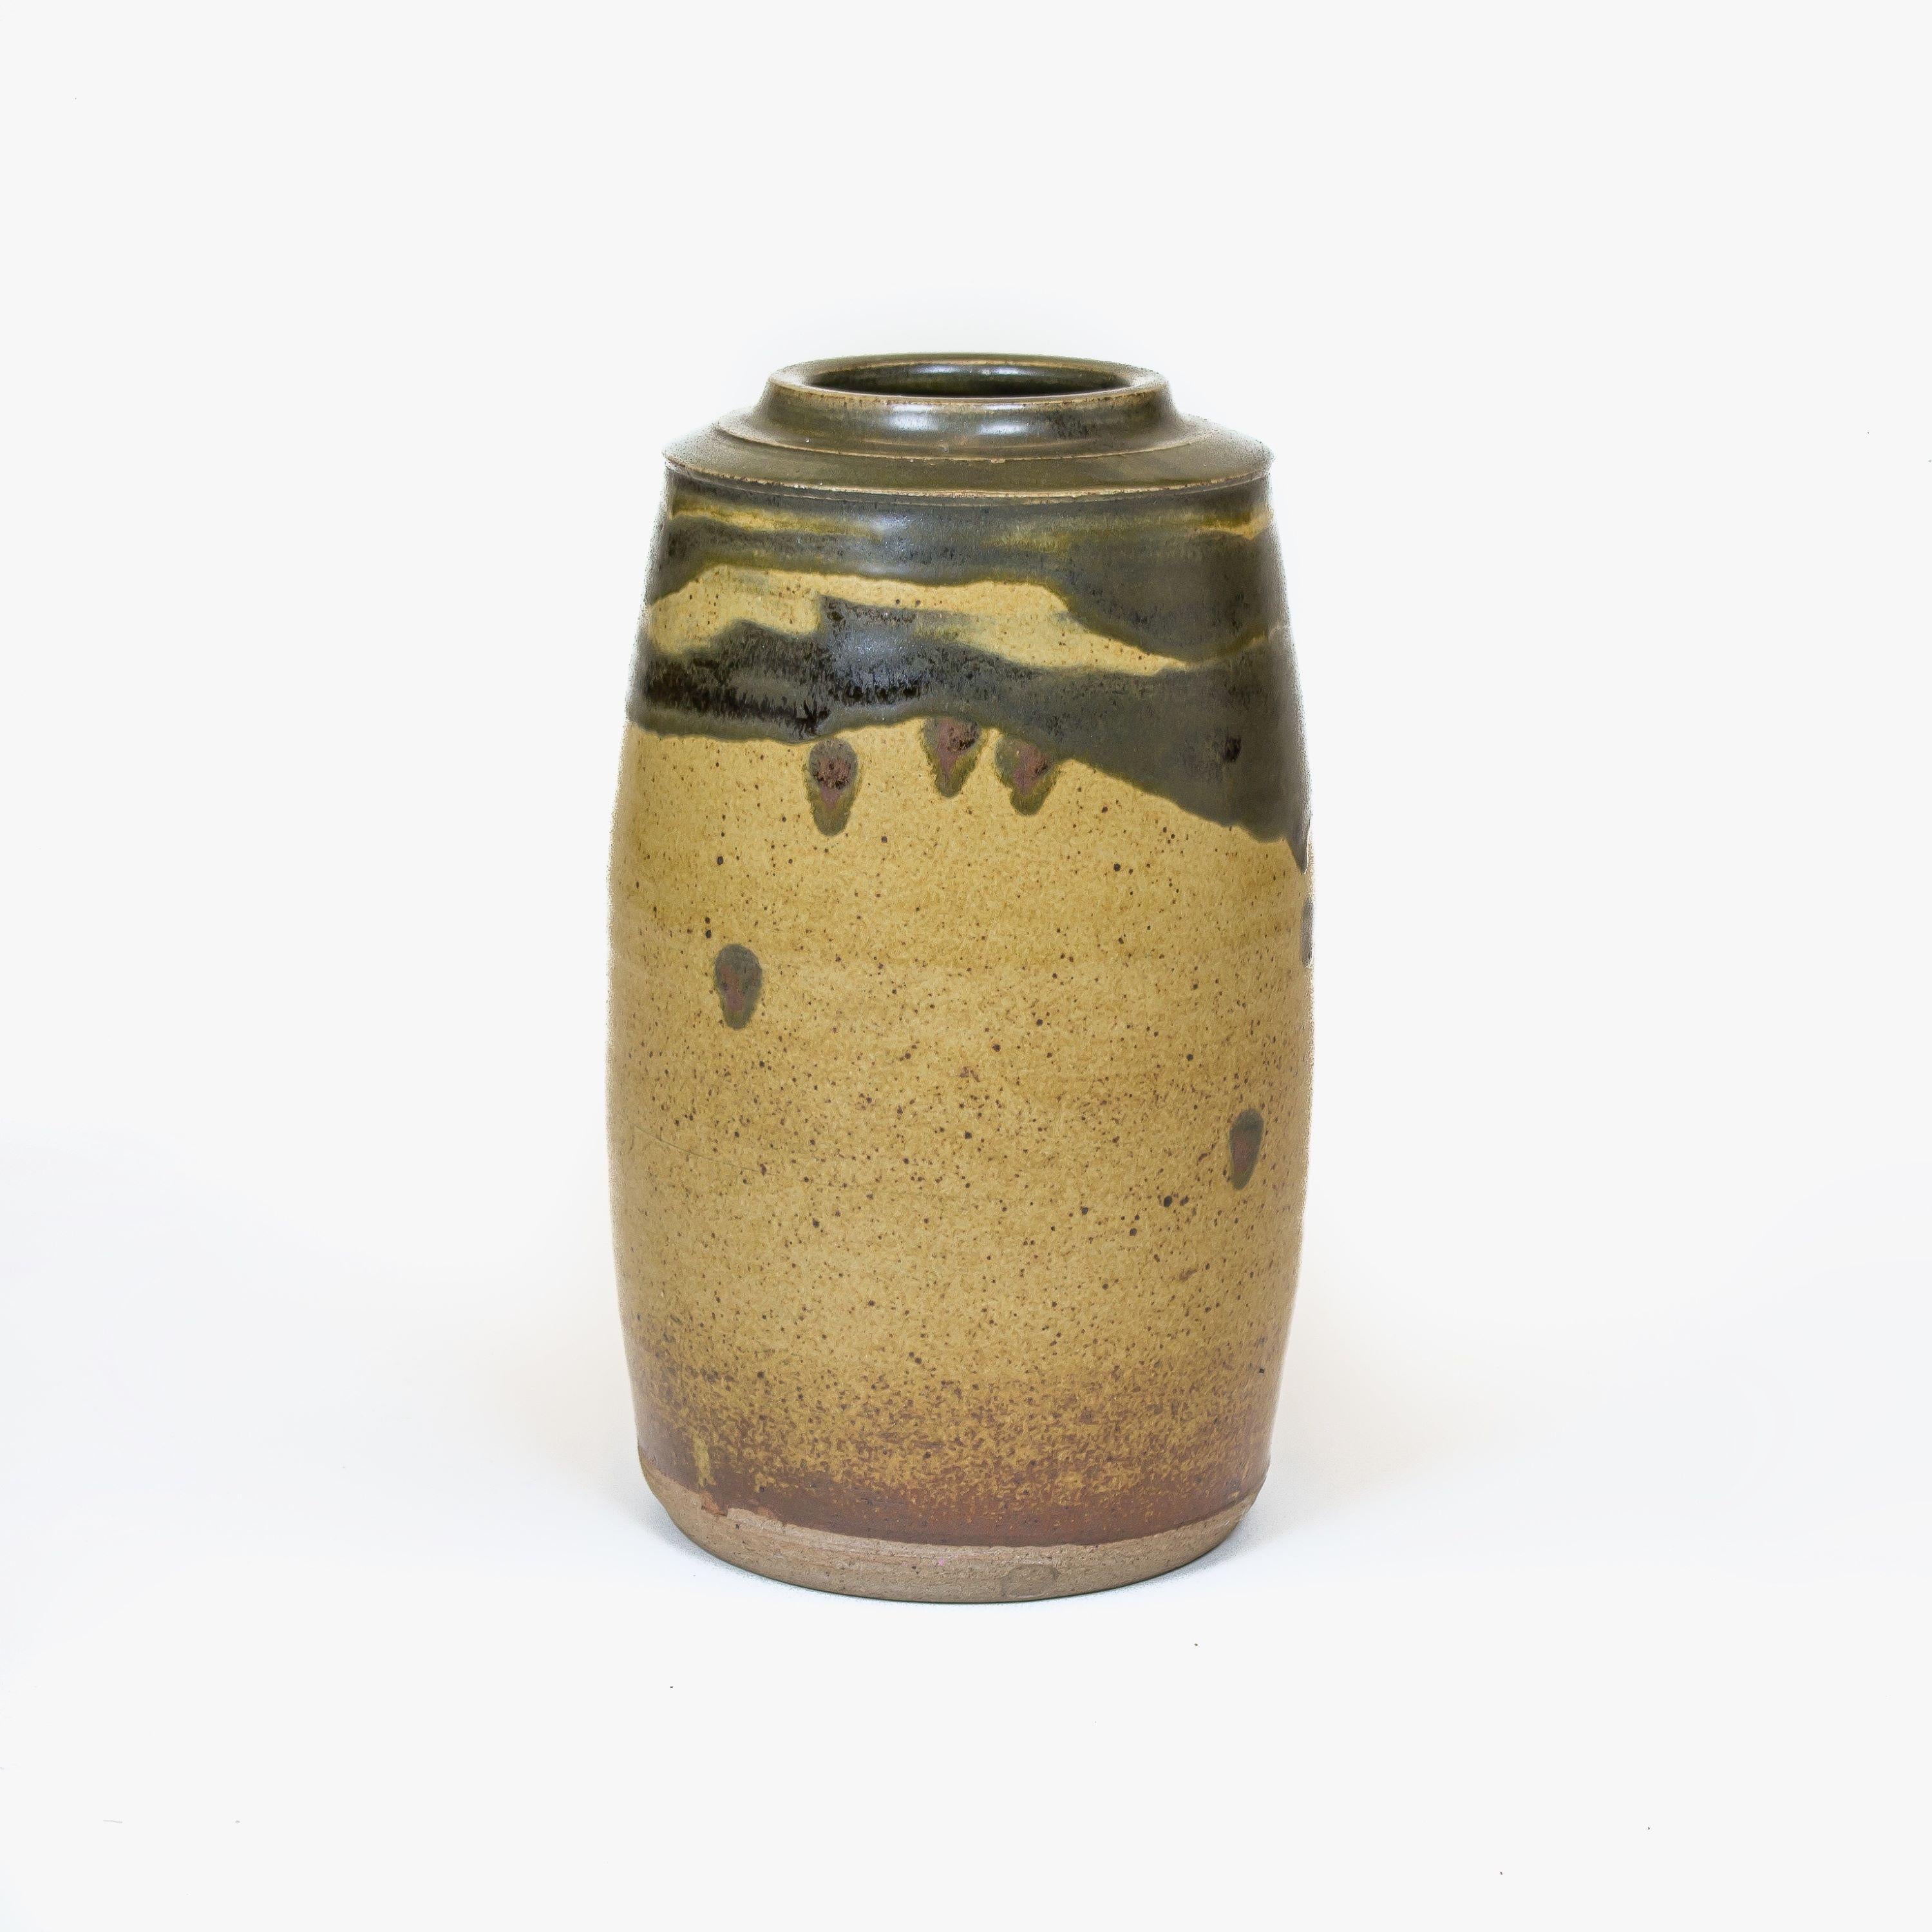 Organic Modern Large Stoneware Vase by Michael Casson, '1925-2003' For Sale